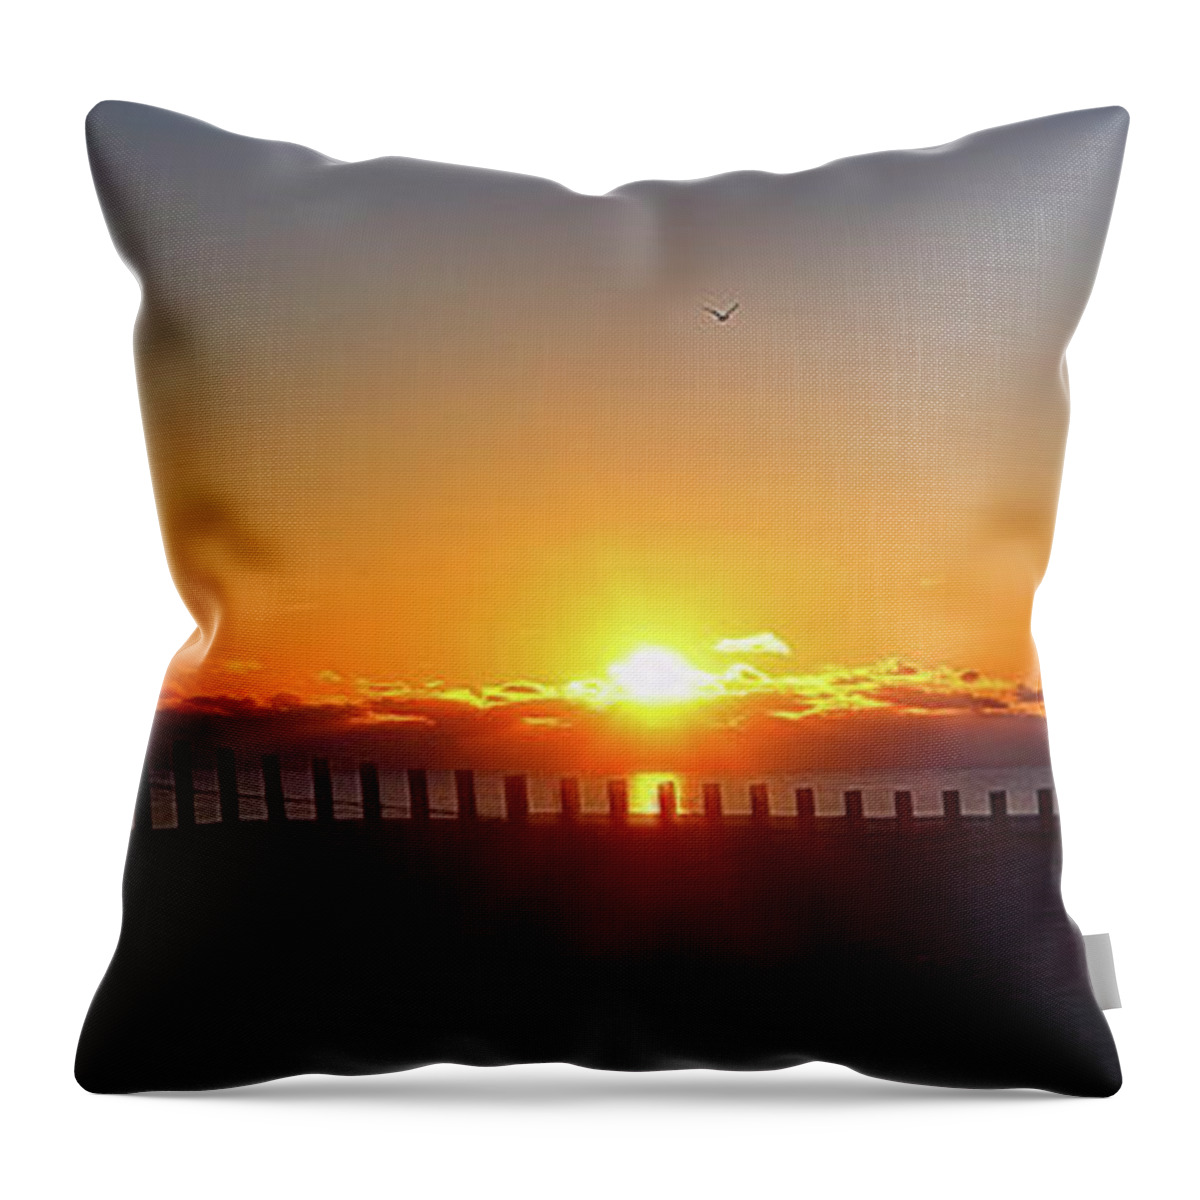 Ocean Throw Pillow featuring the photograph Rising by Newwwman